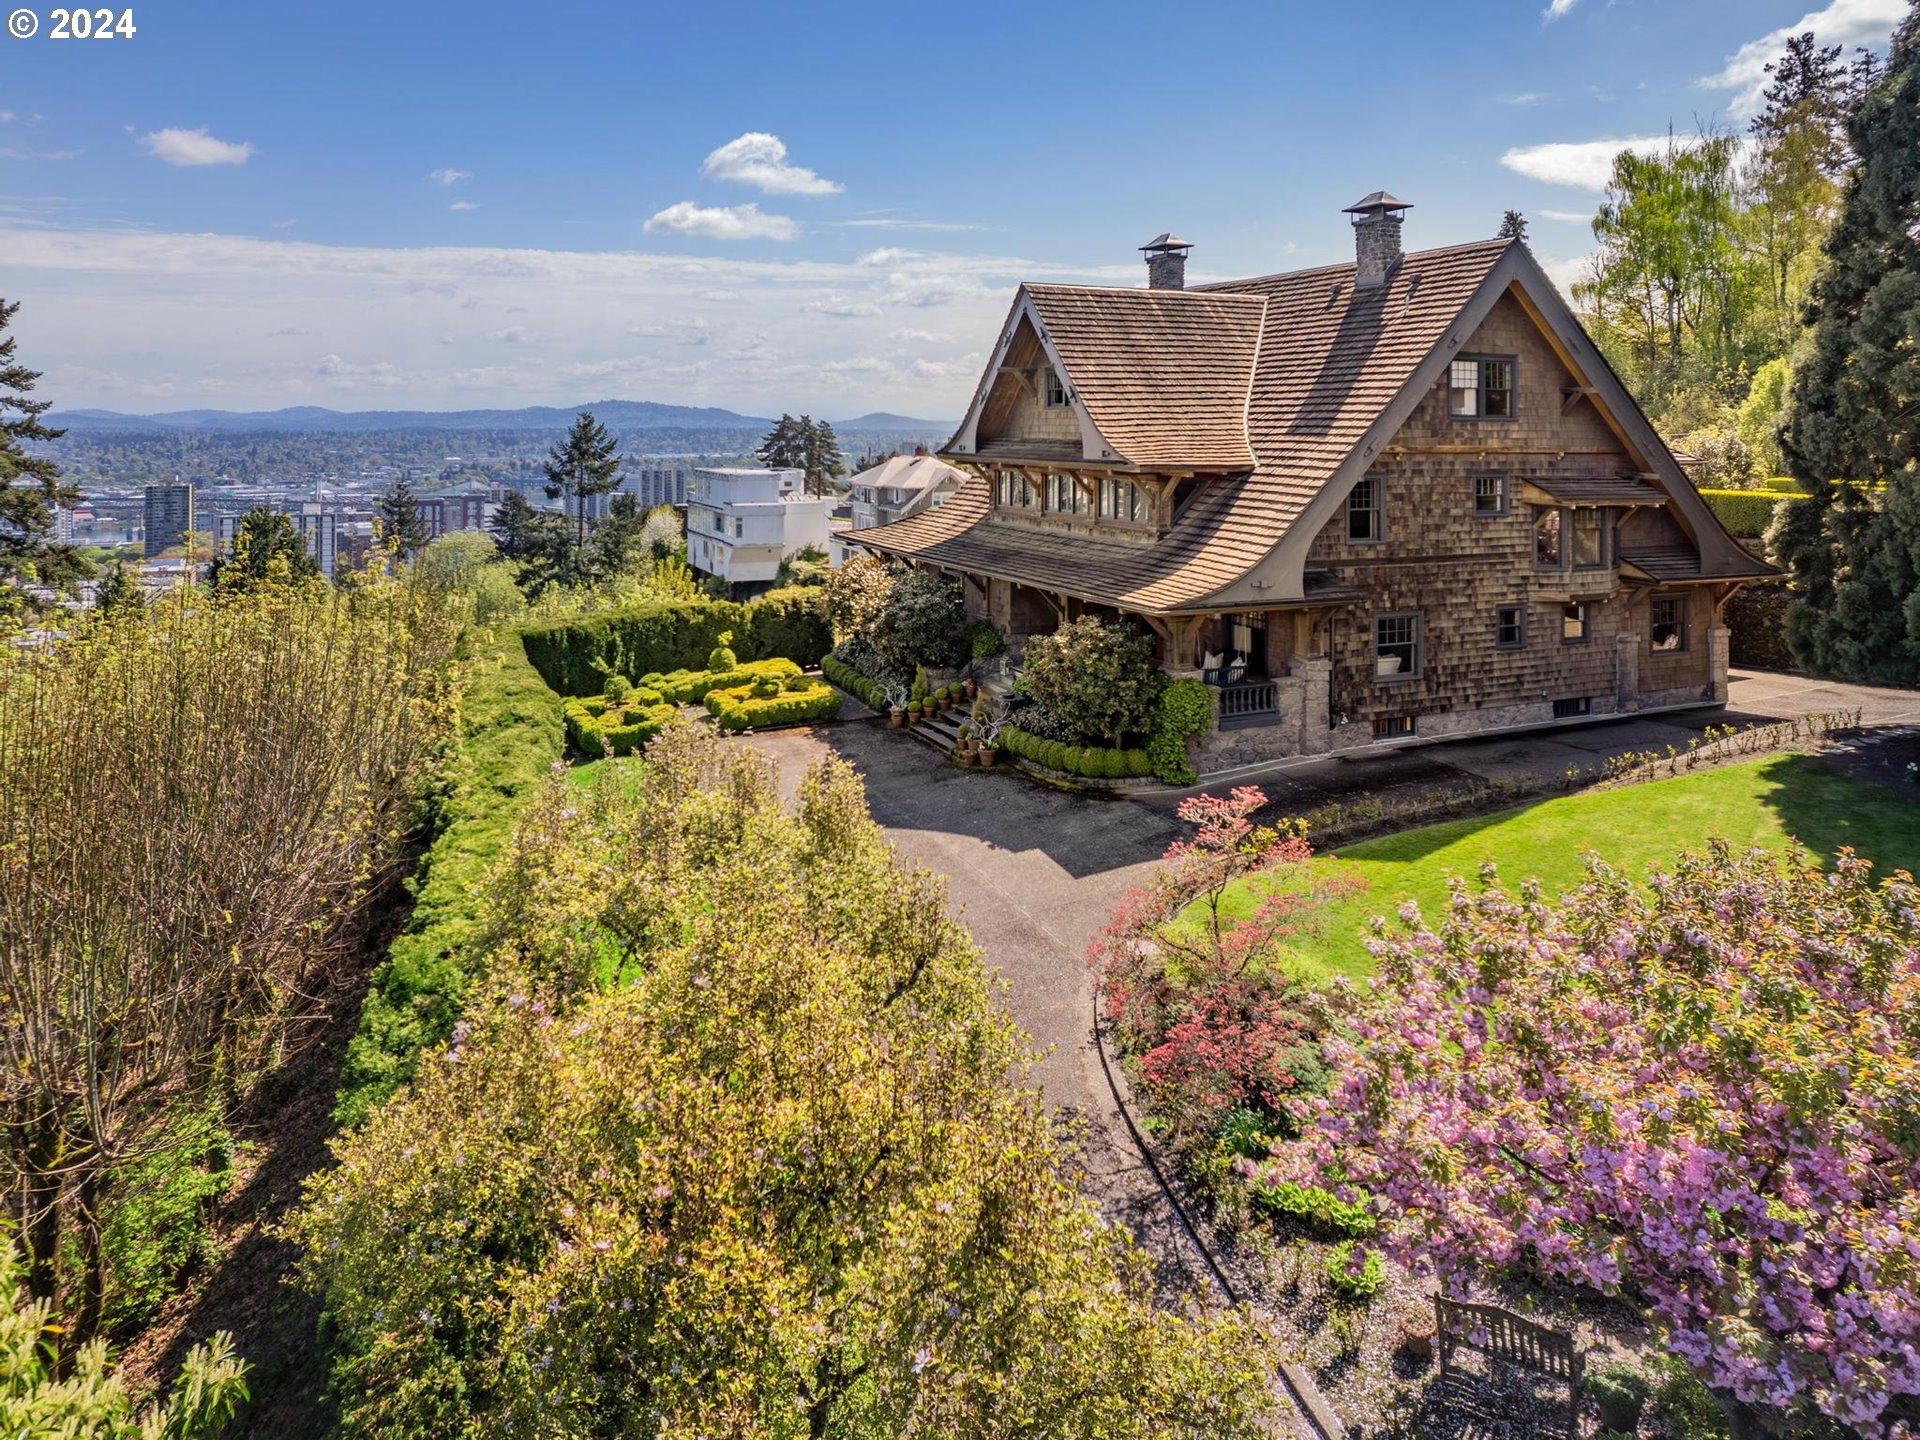 Step into the rich history and luxury of the Joseph Gaston House, an architectural masterpiece built in 1911 by William C. Knighton in Portland's West Hills. This captivating estate offers a timeless allure with its elegant living spaces, and impeccable craftsmanship. Perched on 3/4 of an acre in The Grid, it commands panoramic views of the city skyline and mountains, creating an idyllic backdrop for everyday living. Features include intricate moldings, high ceilings, stunning primary bedroom with walk-in closet and spacious bathroom with steam shower, and remarkable 5,000-bottle cellar. Outside, a beautiful patio overlooks downtown Portland, providing a serene retreat to unwind and take in the scenery. Extensively remodeled in the early 2000s, including full replacement of plumbing, and electrical. From its historic charm to modern amenities, the Joseph Gaston House epitomizes sophistication and elegance, offering a rare opportunity to own a piece of Portland's architectural legacy. [Home Energy Score = 1. HES Report at https://rpt.greenbuildingregistry.com/hes/OR10227560]